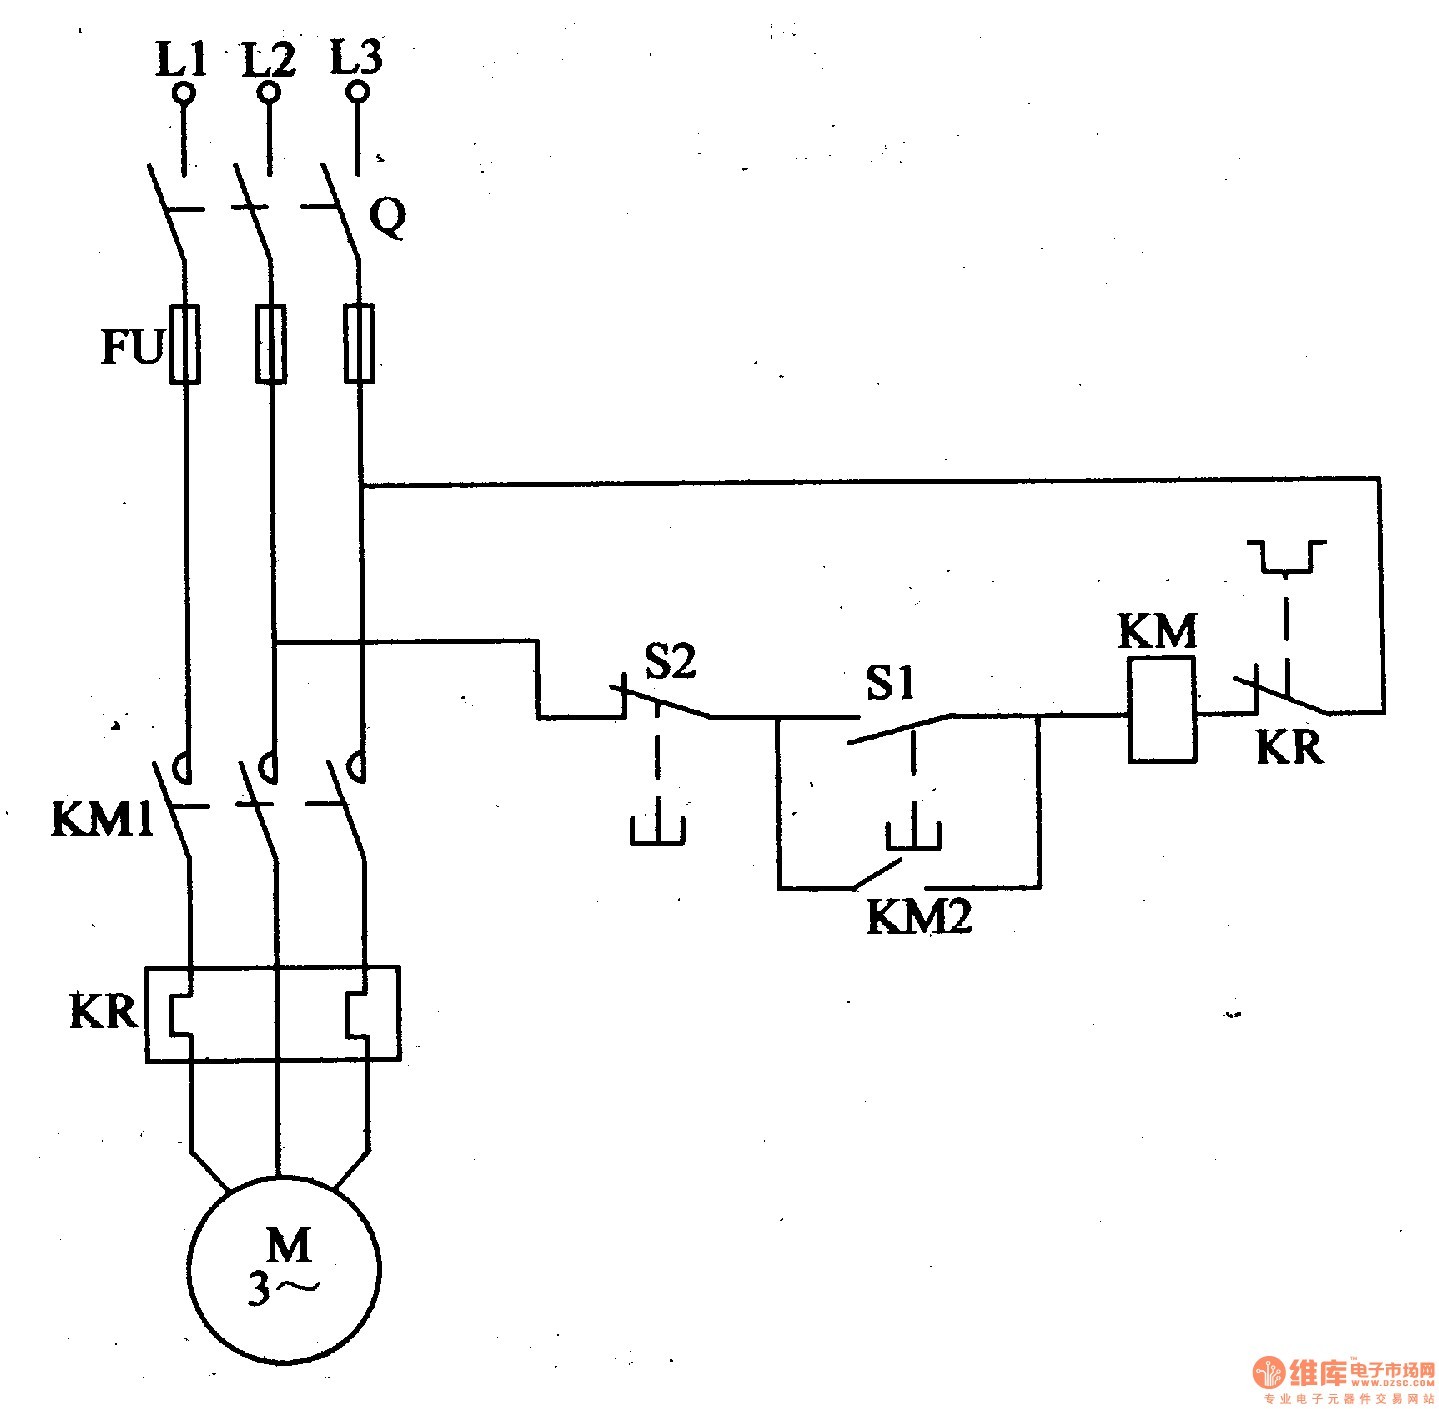 220v Wiring Diagram Awesome Famous Starter Motor Circuit Ideas Electrical Circuit Diagram